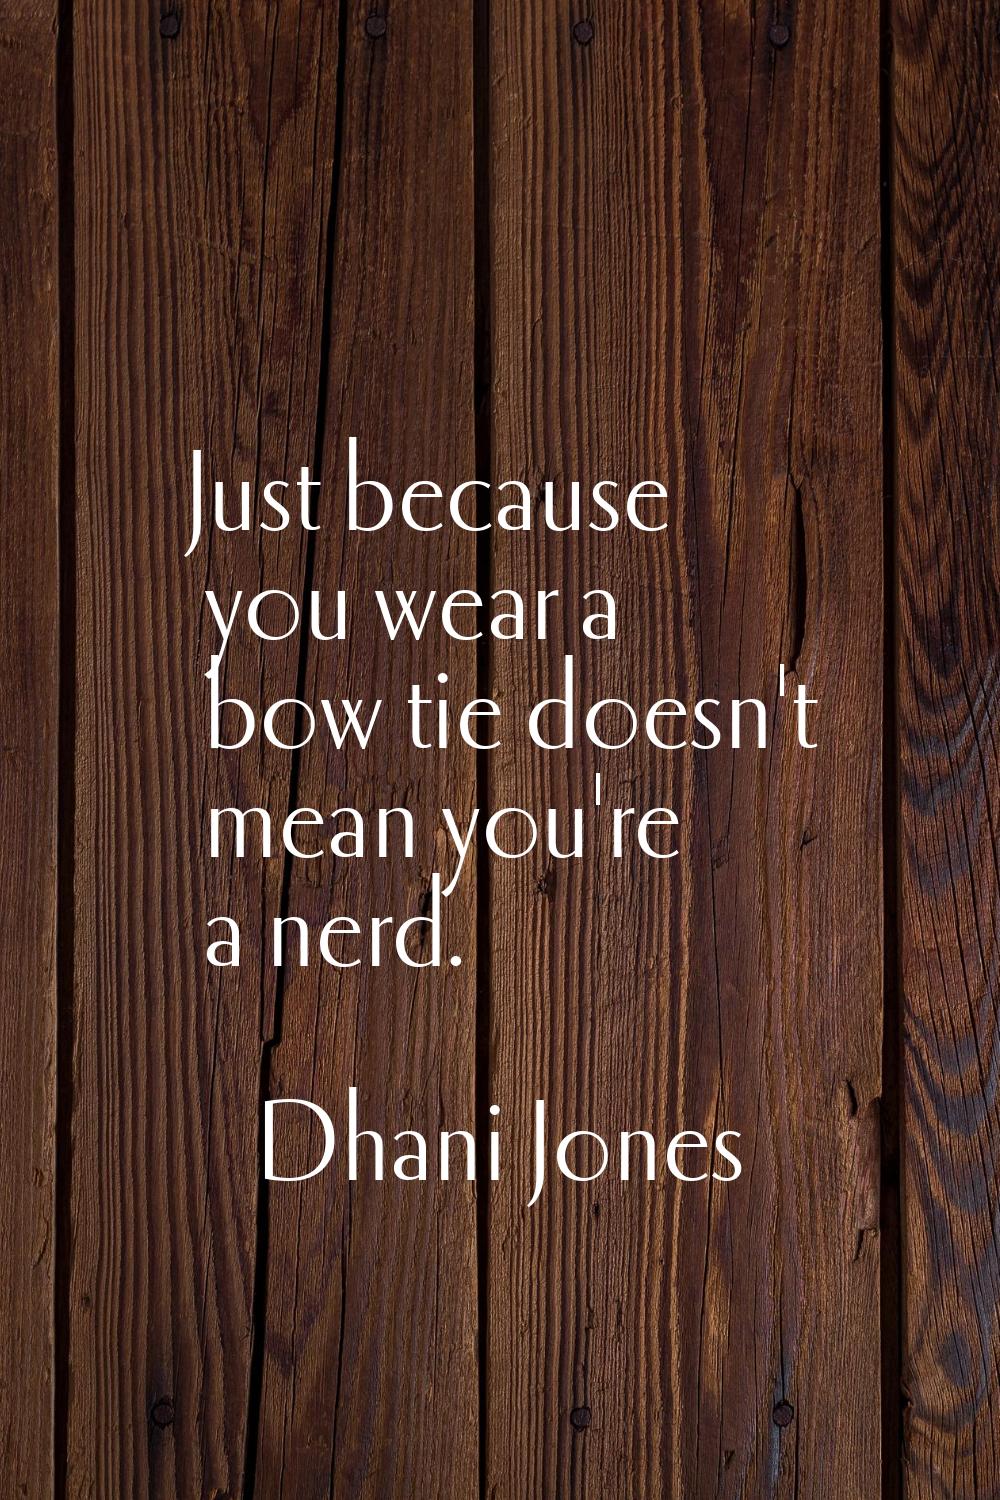 Just because you wear a bow tie doesn't mean you're a nerd.